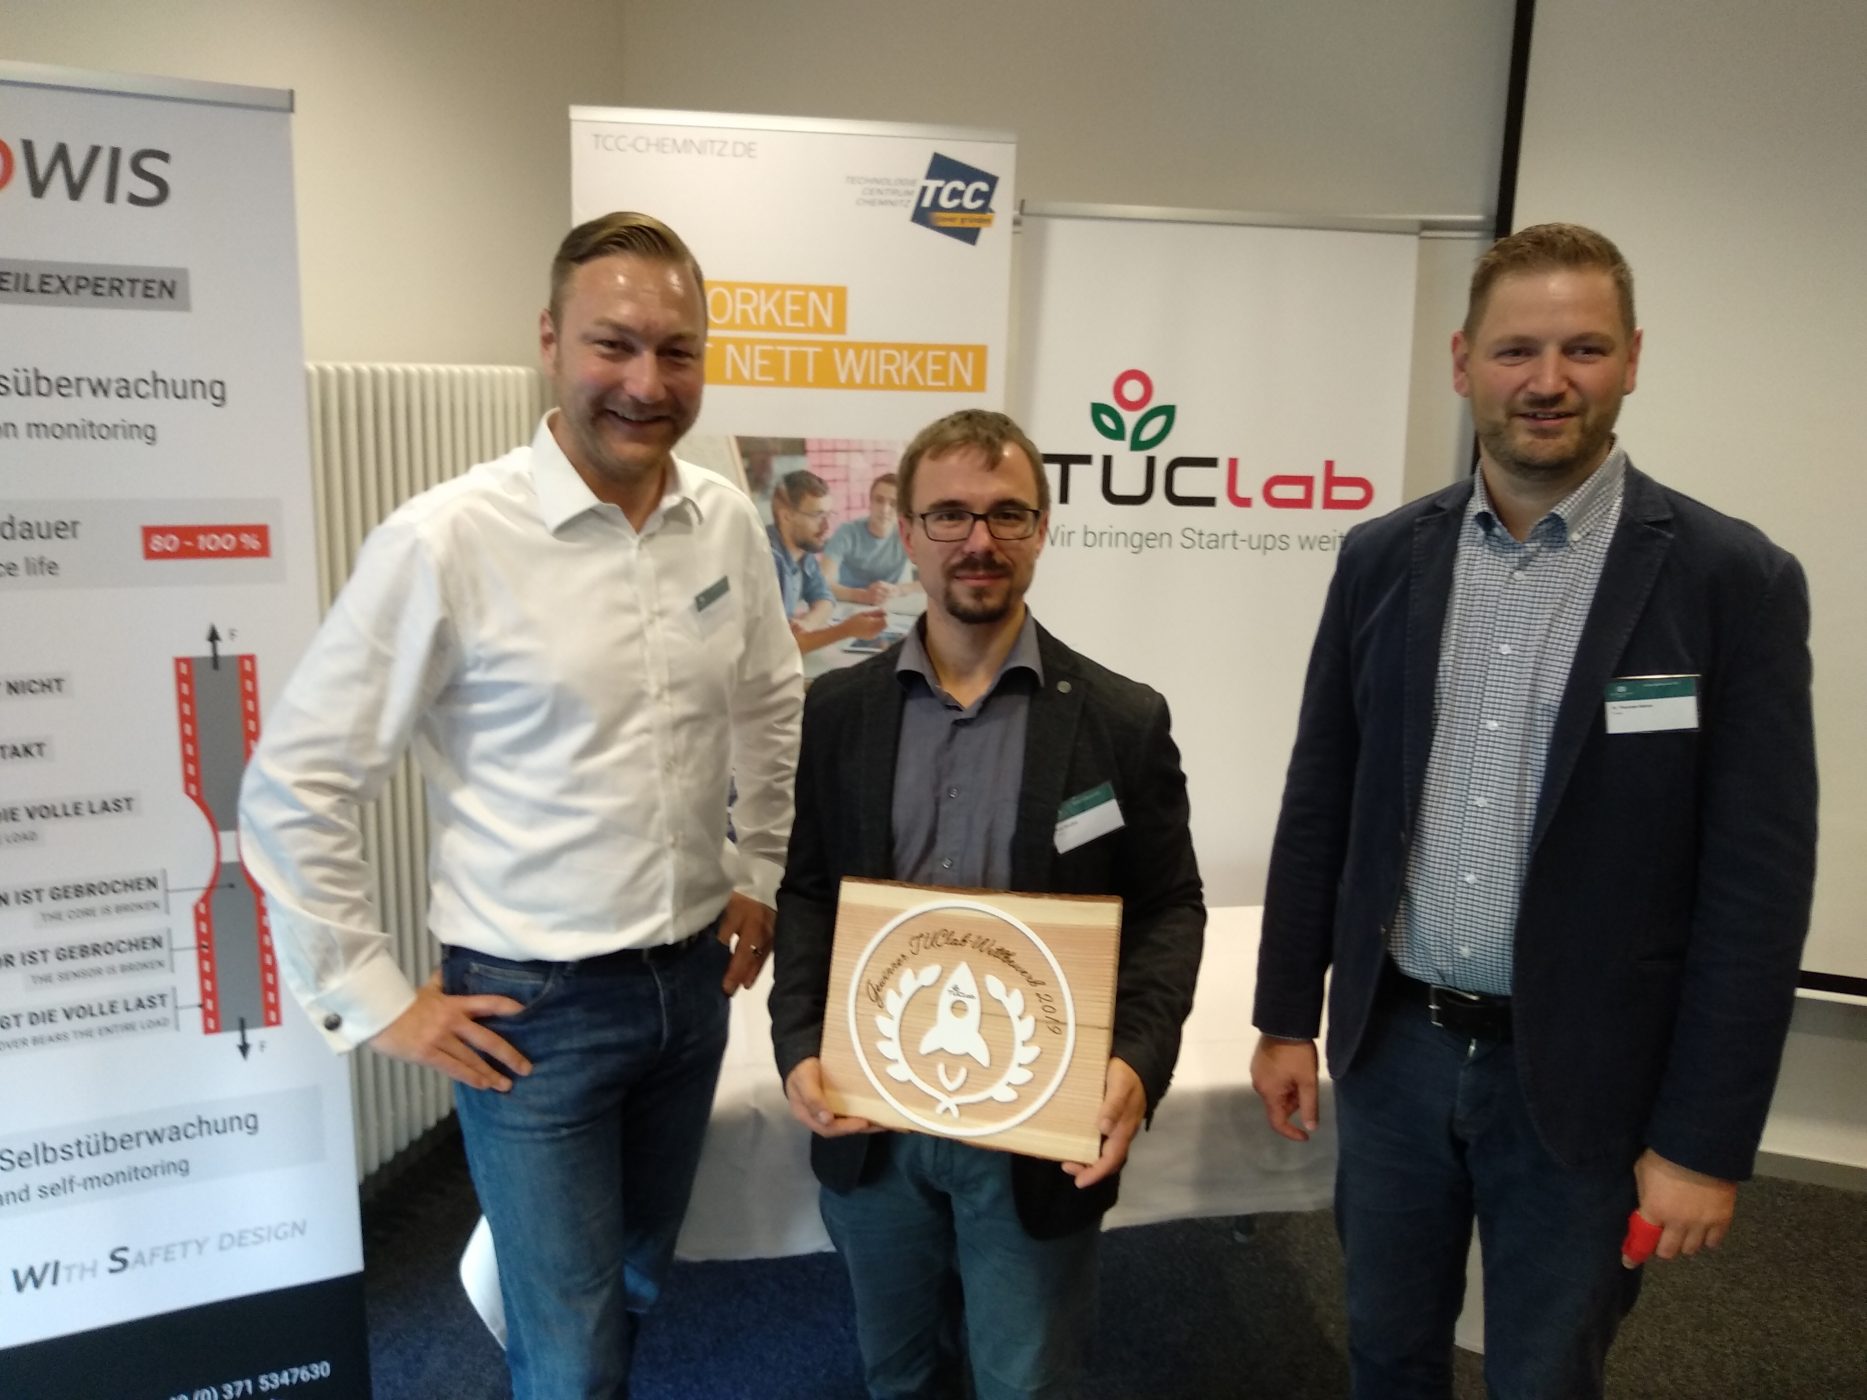 Congratulations to the TROWIS startup from Mittweida!